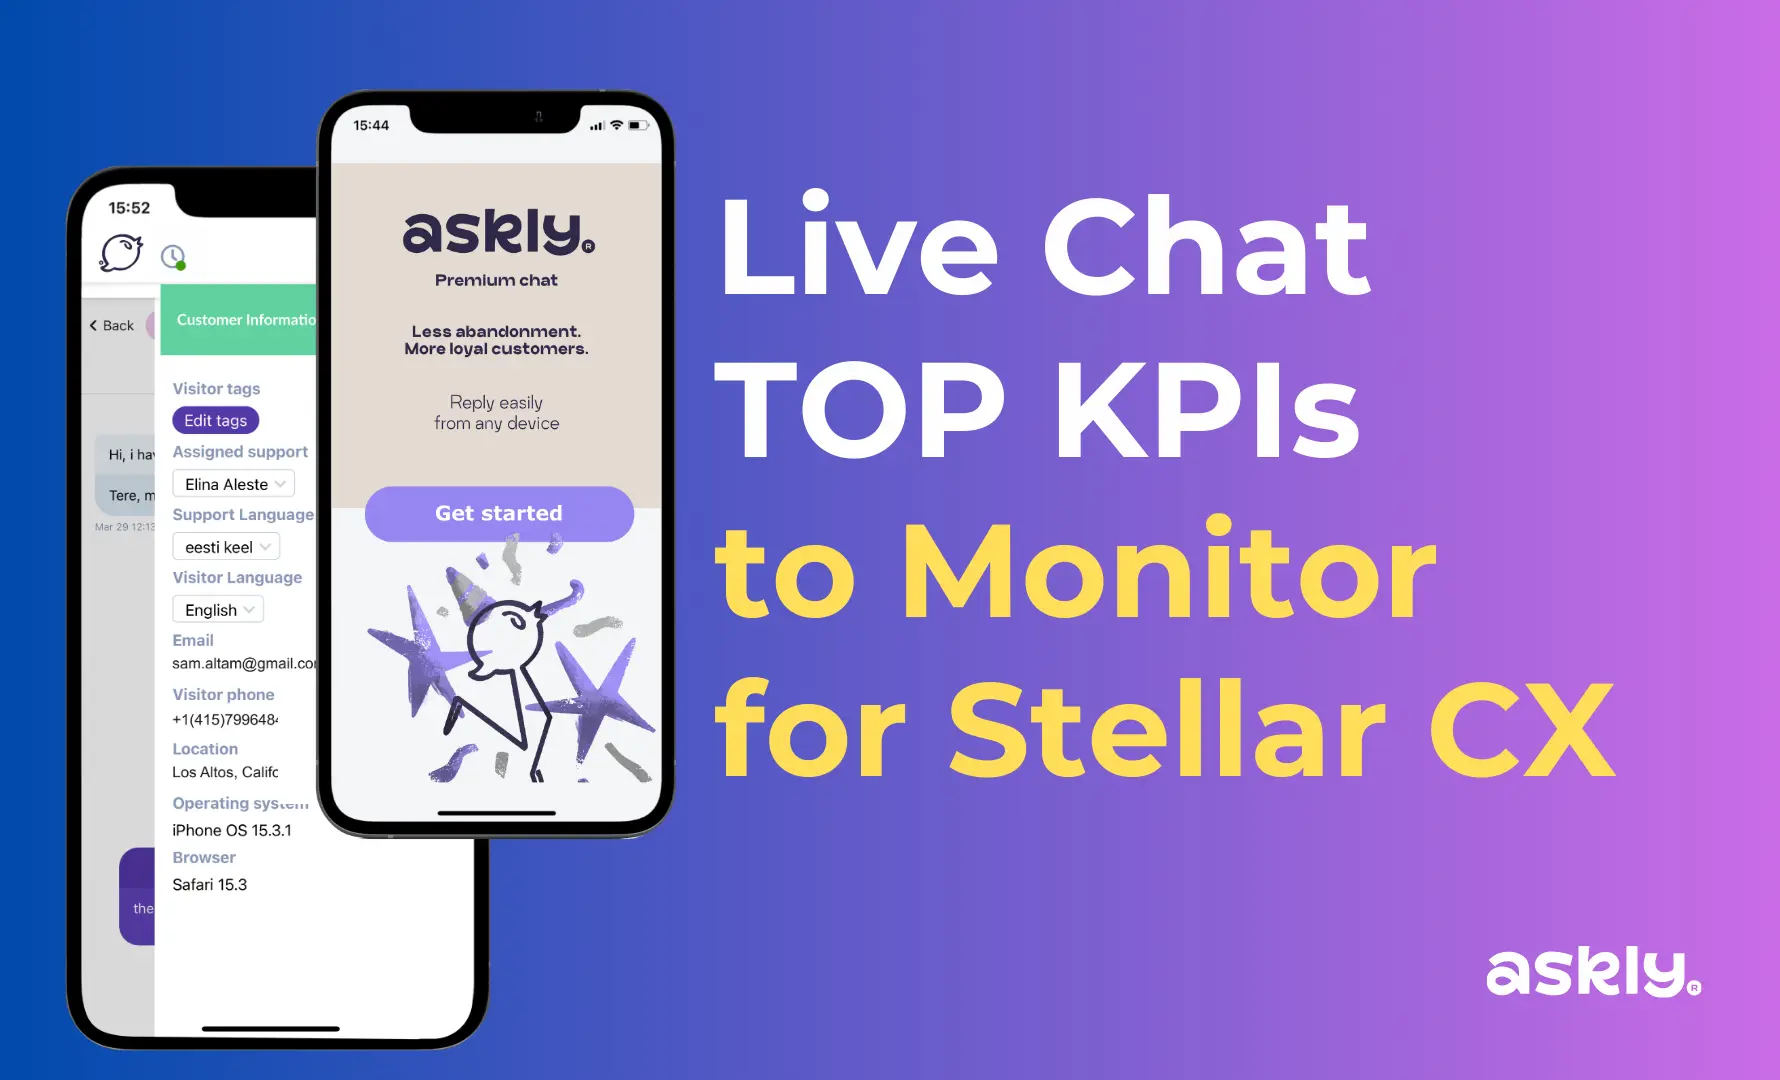 Live Chat TOP KPIs to Monitor for Stellar CX